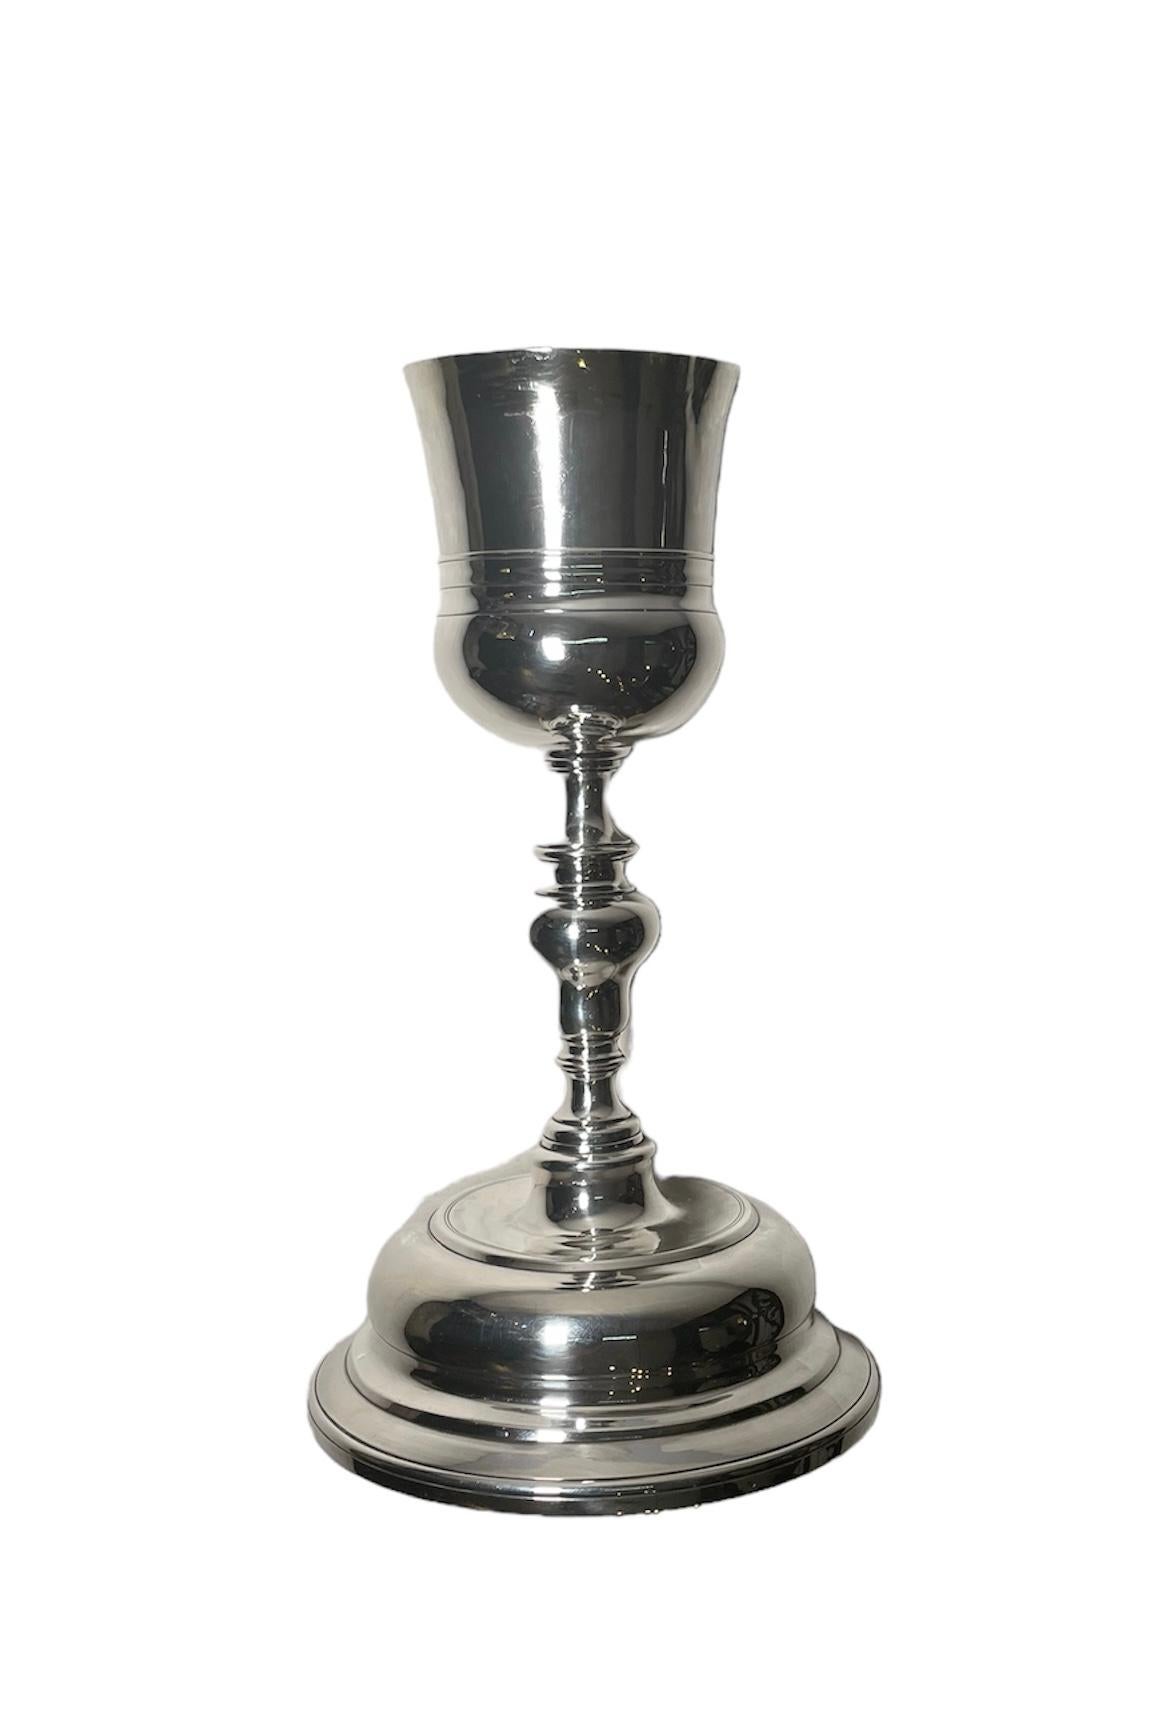 Neoclassical Revival 19th Century Spaniard Silver Chalice For Sale